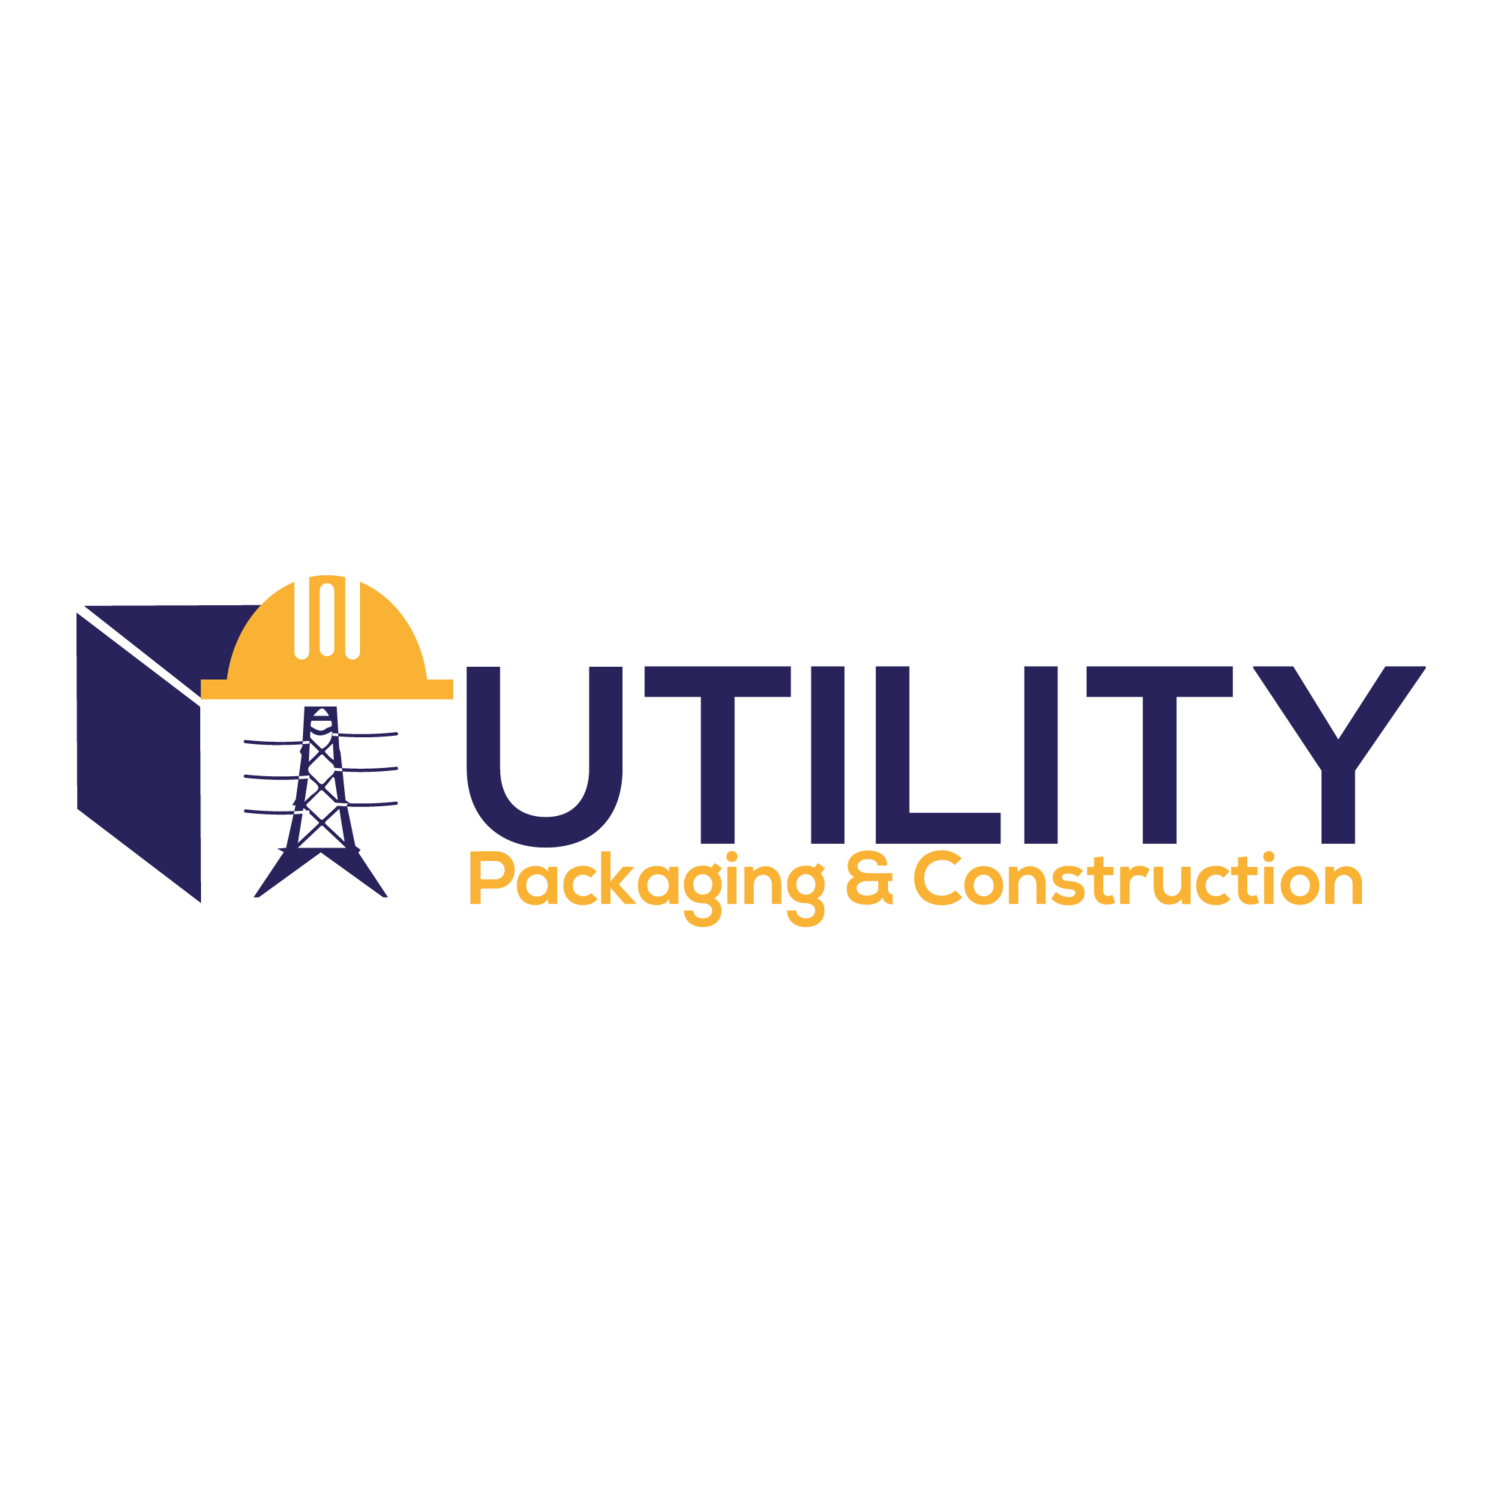 Utility Packaging & Construction, Inc.